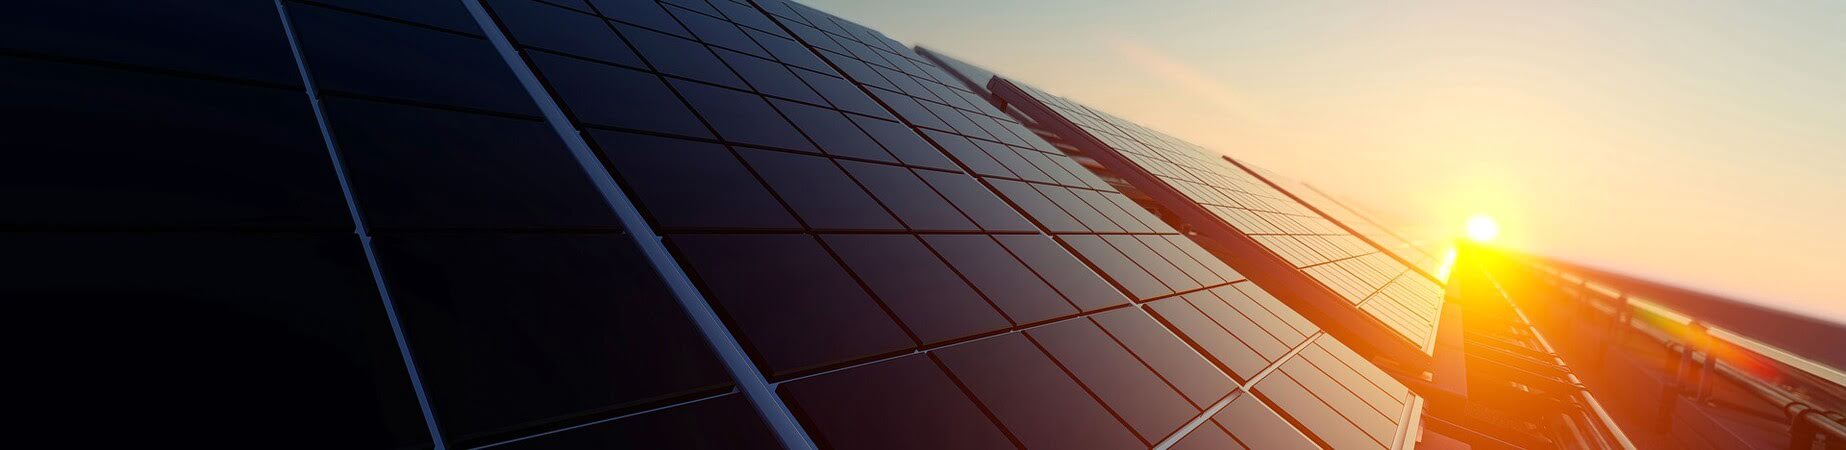 Solar panel array with sun coming up